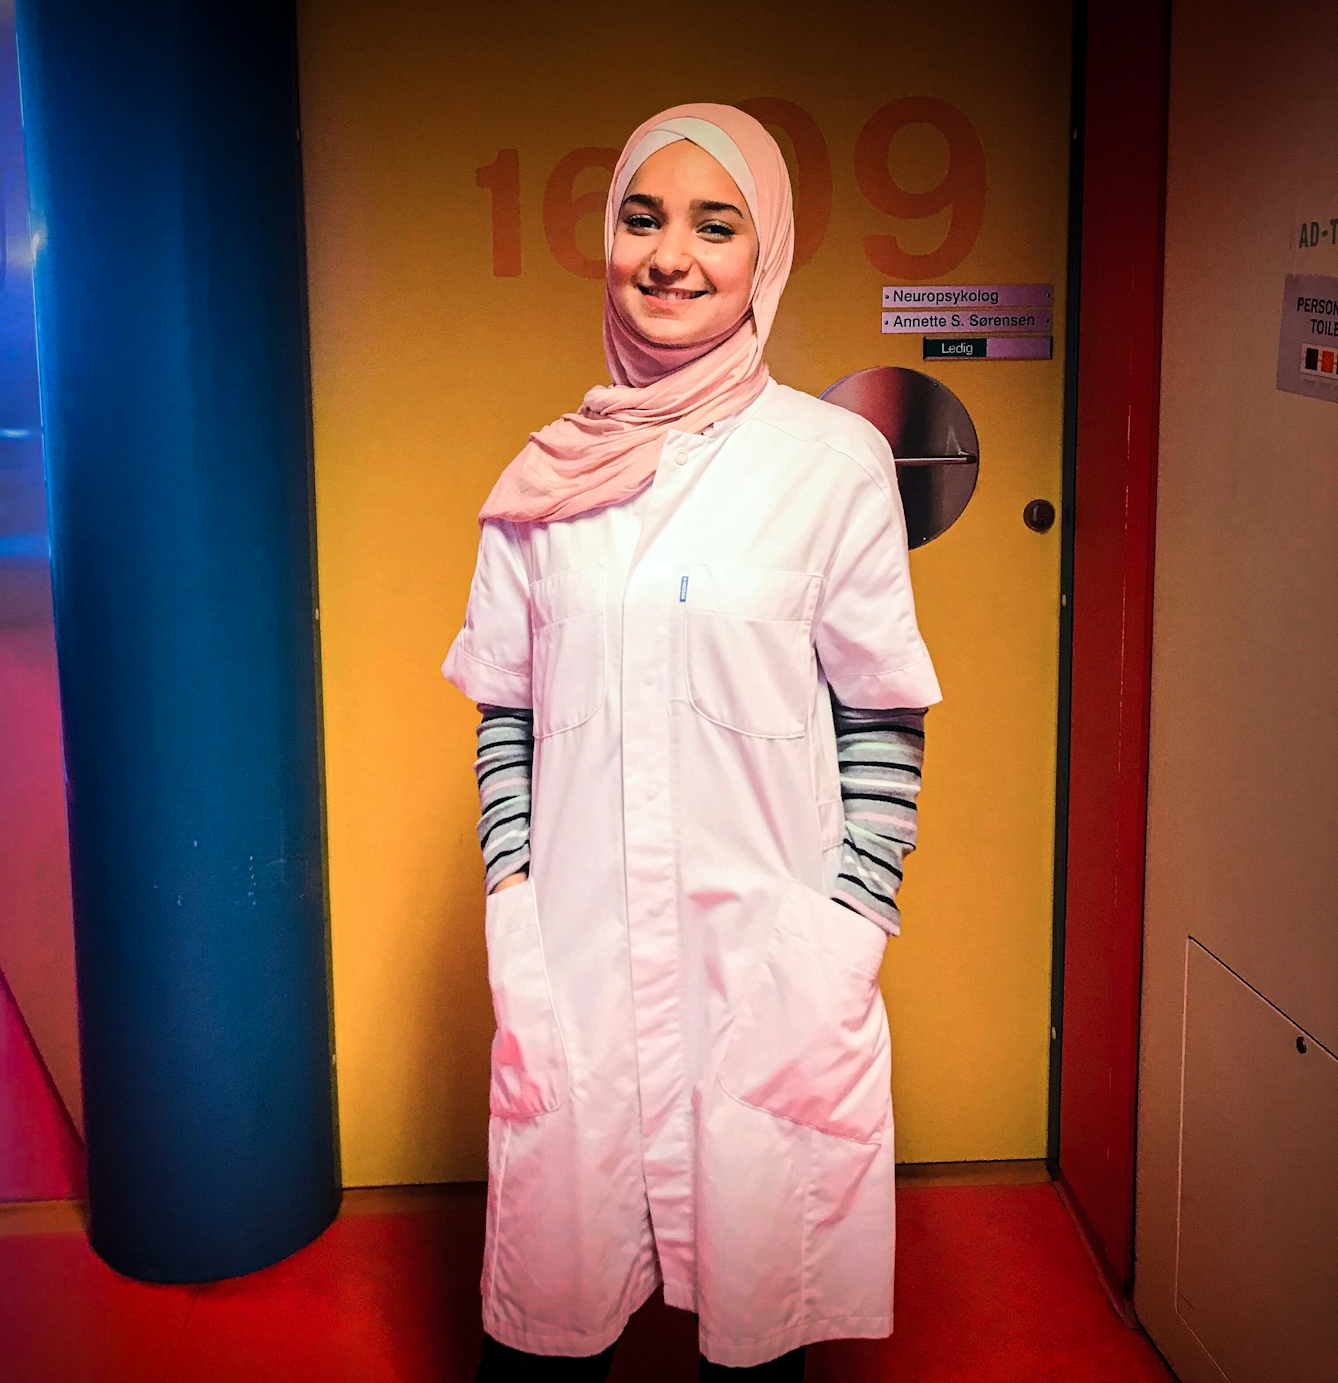 Photograph of a young woman wearing a head scarf and dressed in a medics coat. Behind her are the colourful doors and walls of a hospital.